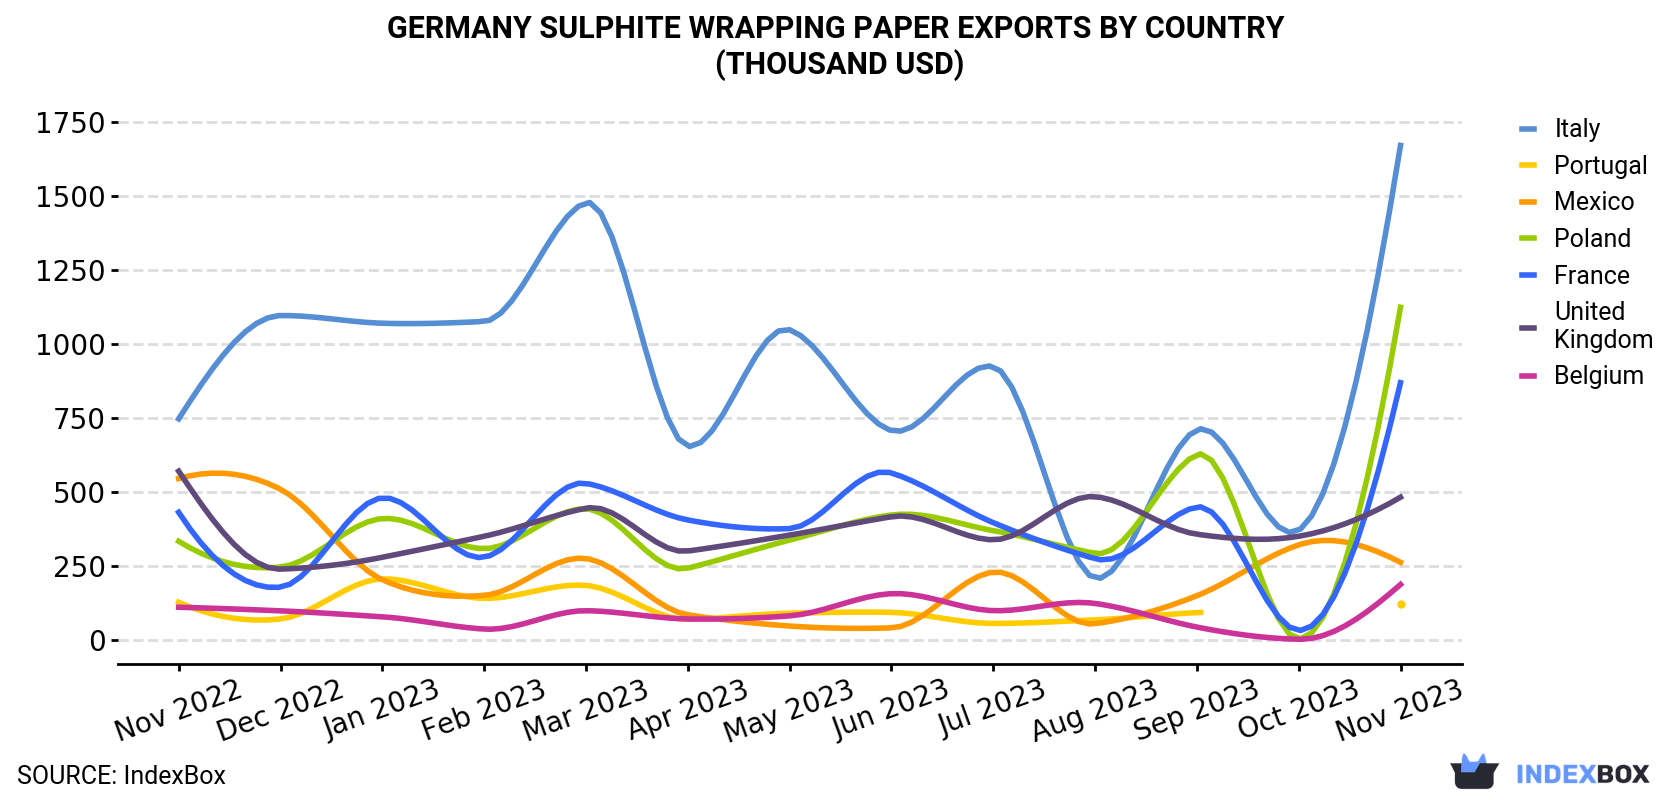 Germany Sulphite Wrapping Paper Exports By Country (Thousand USD)